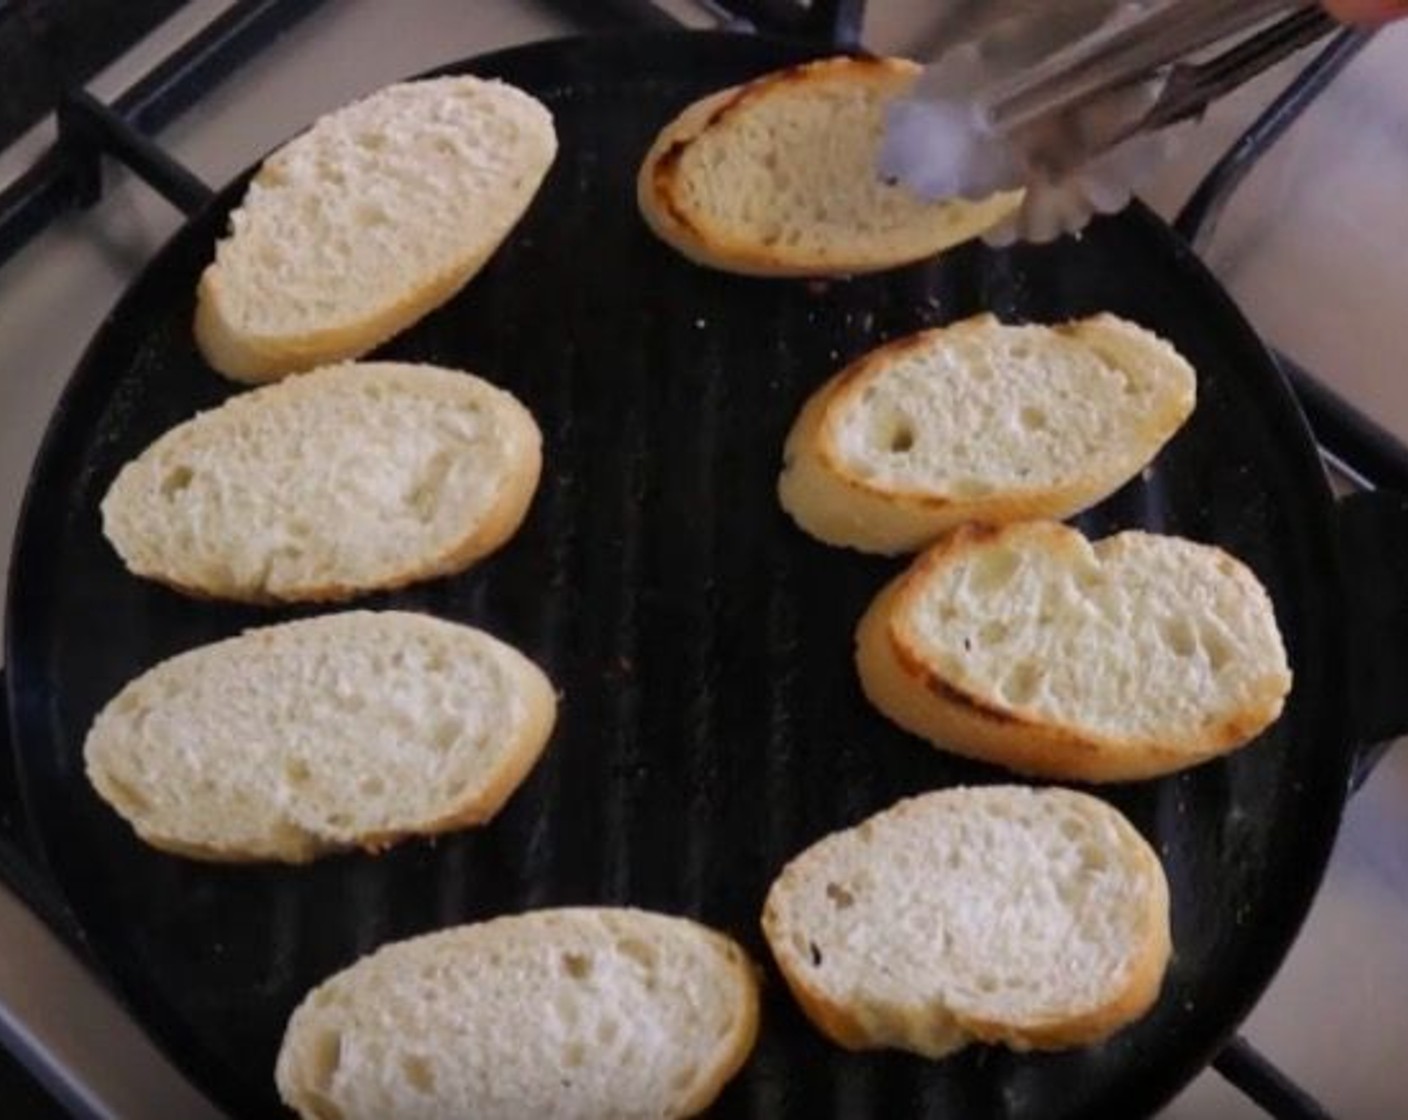 step 7 Heat a grilling pan over a medium heat. Once the pan gets hot, add the slices of bread and toast for 2 minutes on each side.